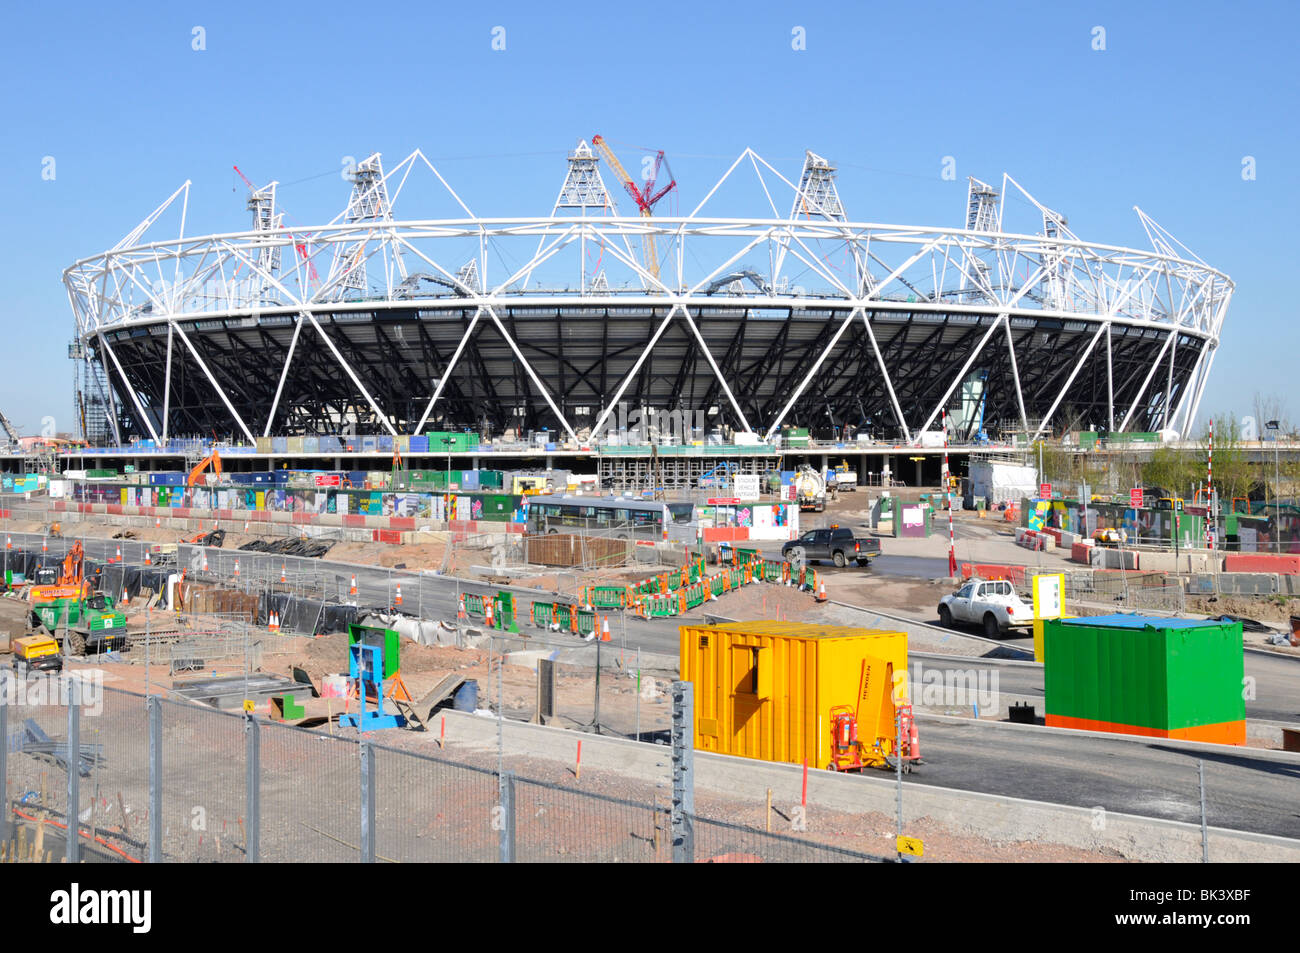 Cranes at Stratford 2012 Olympic & Paralympic Games sports stadium building industry construction site work in progress Newham East London England UK Stock Photo